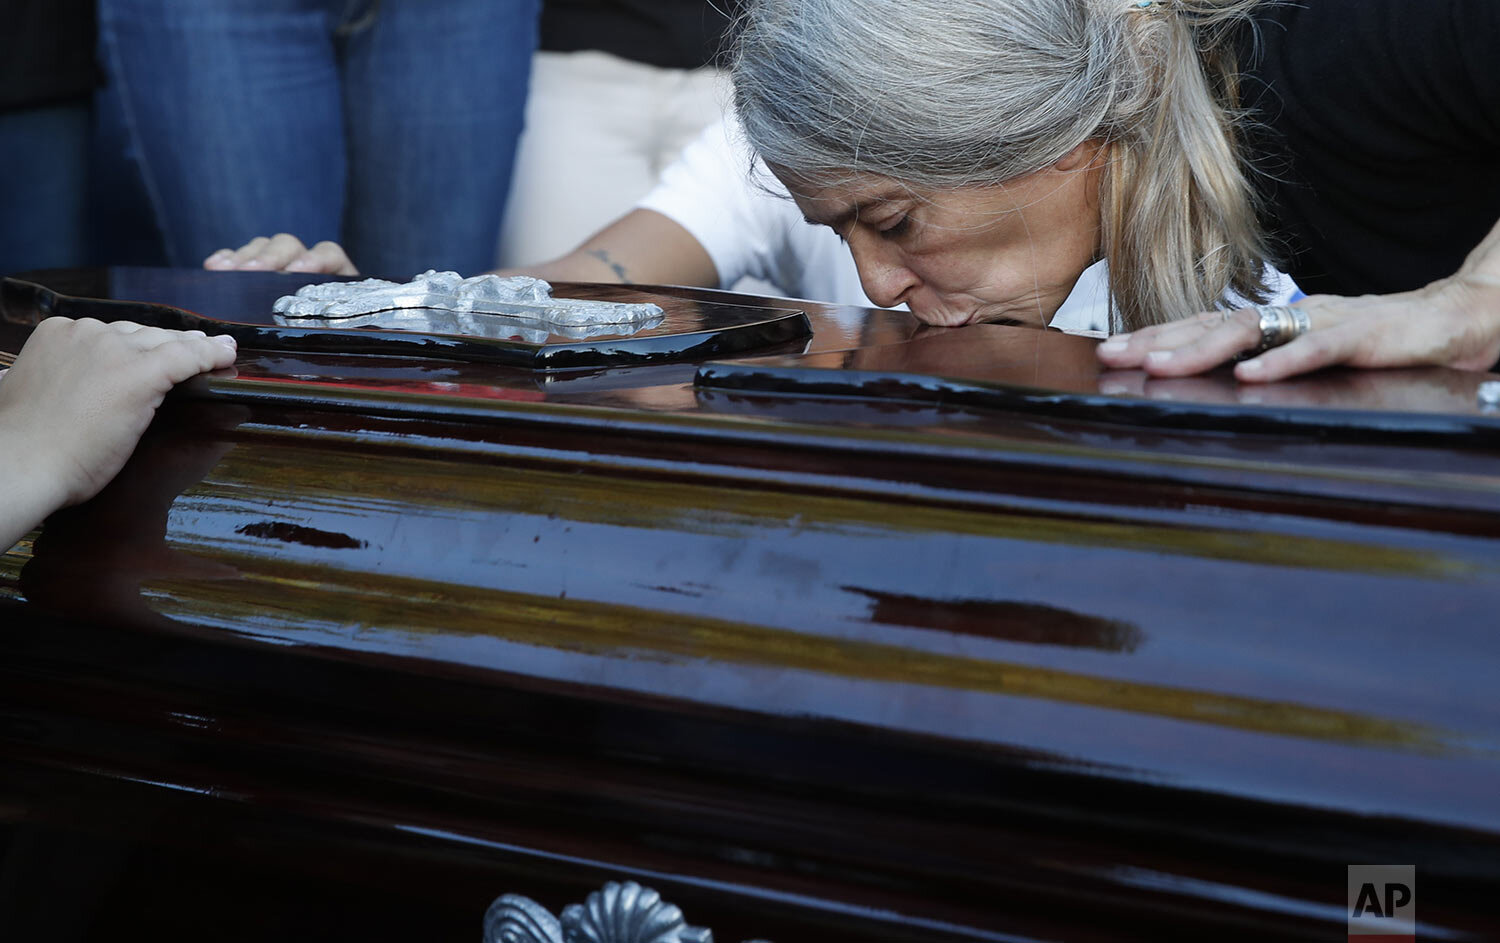  Patricia Nasutti, mother of 18-year-old Ursula Bahillo who was found in a field stabbed to death, kisses her daughter’s coffin before burying her at the cemetery in Rojas, Argentina, Feb. 10, 2021. Bahillo's ex-boyfriend, a police officer, has been 